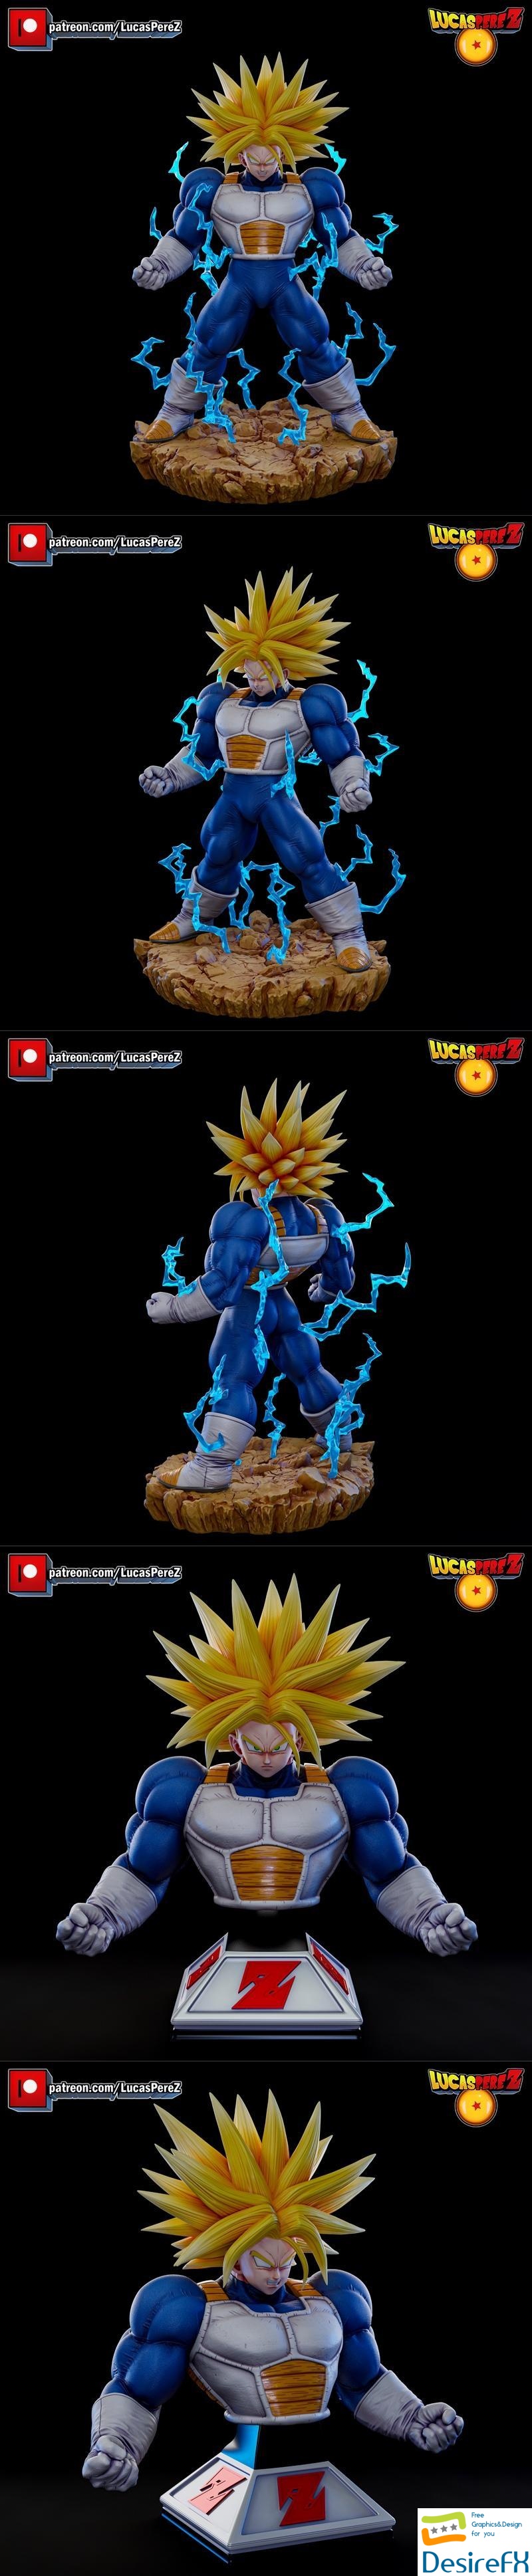 Lucas Perez - Super Trunks and Busto 3D Print